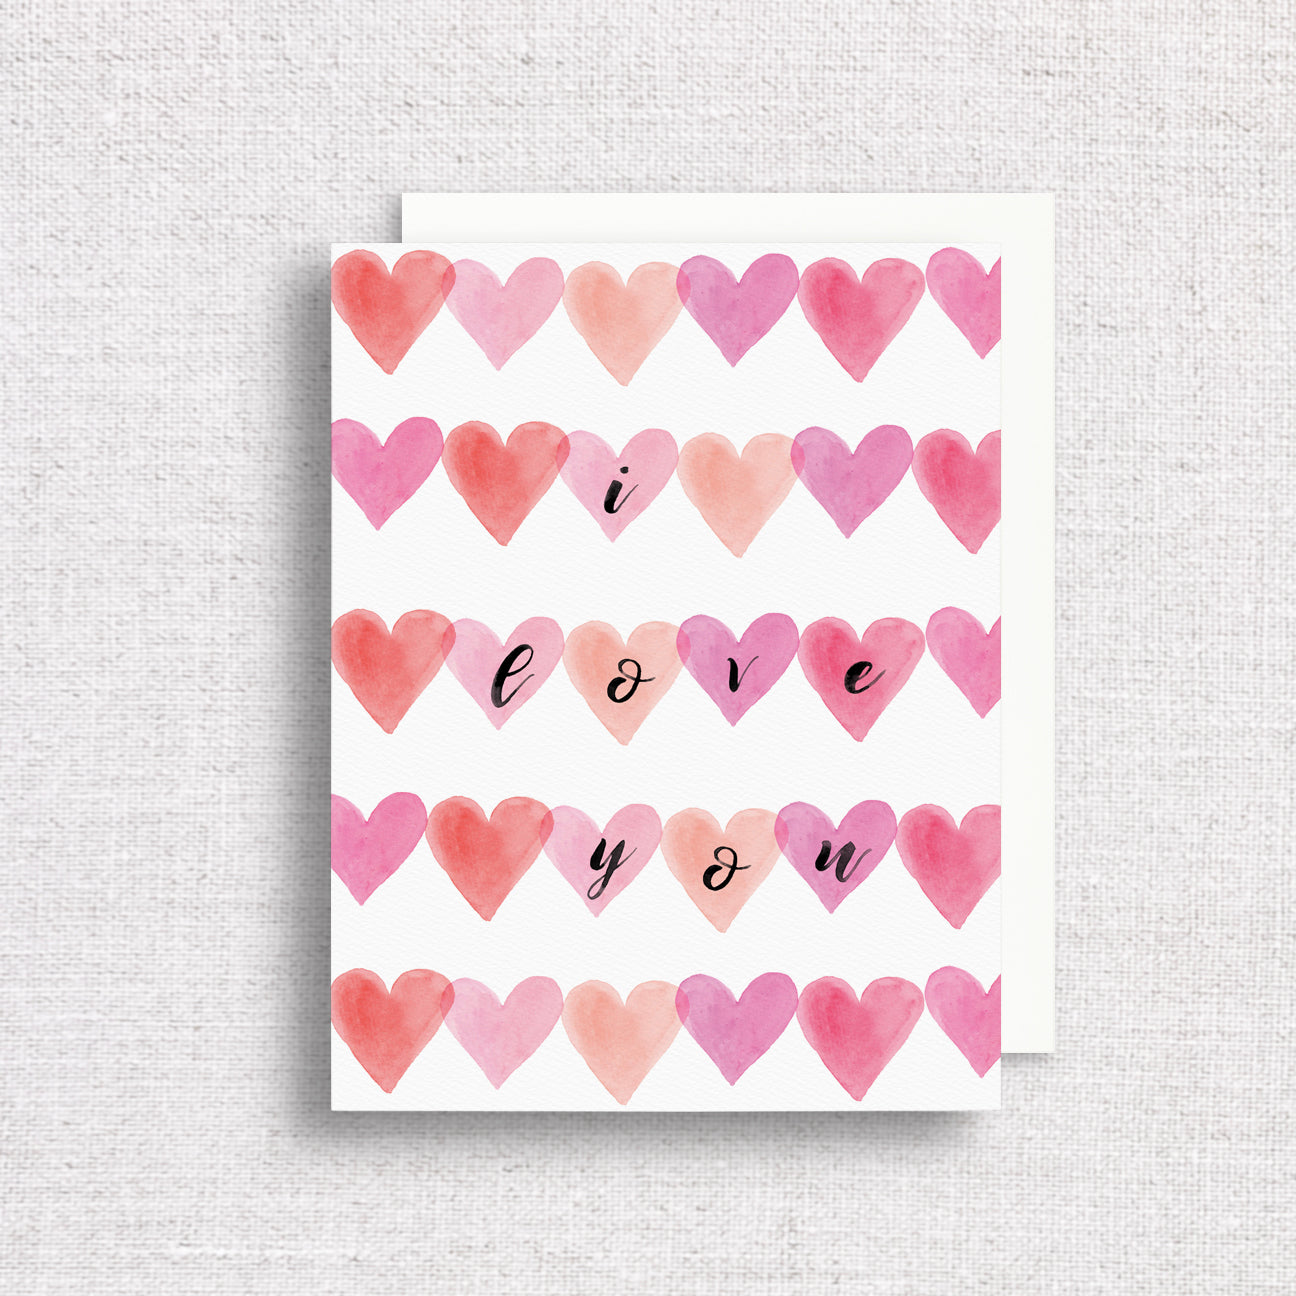 I Love You Watercolor Hearts Greeting Card by Gert & Co